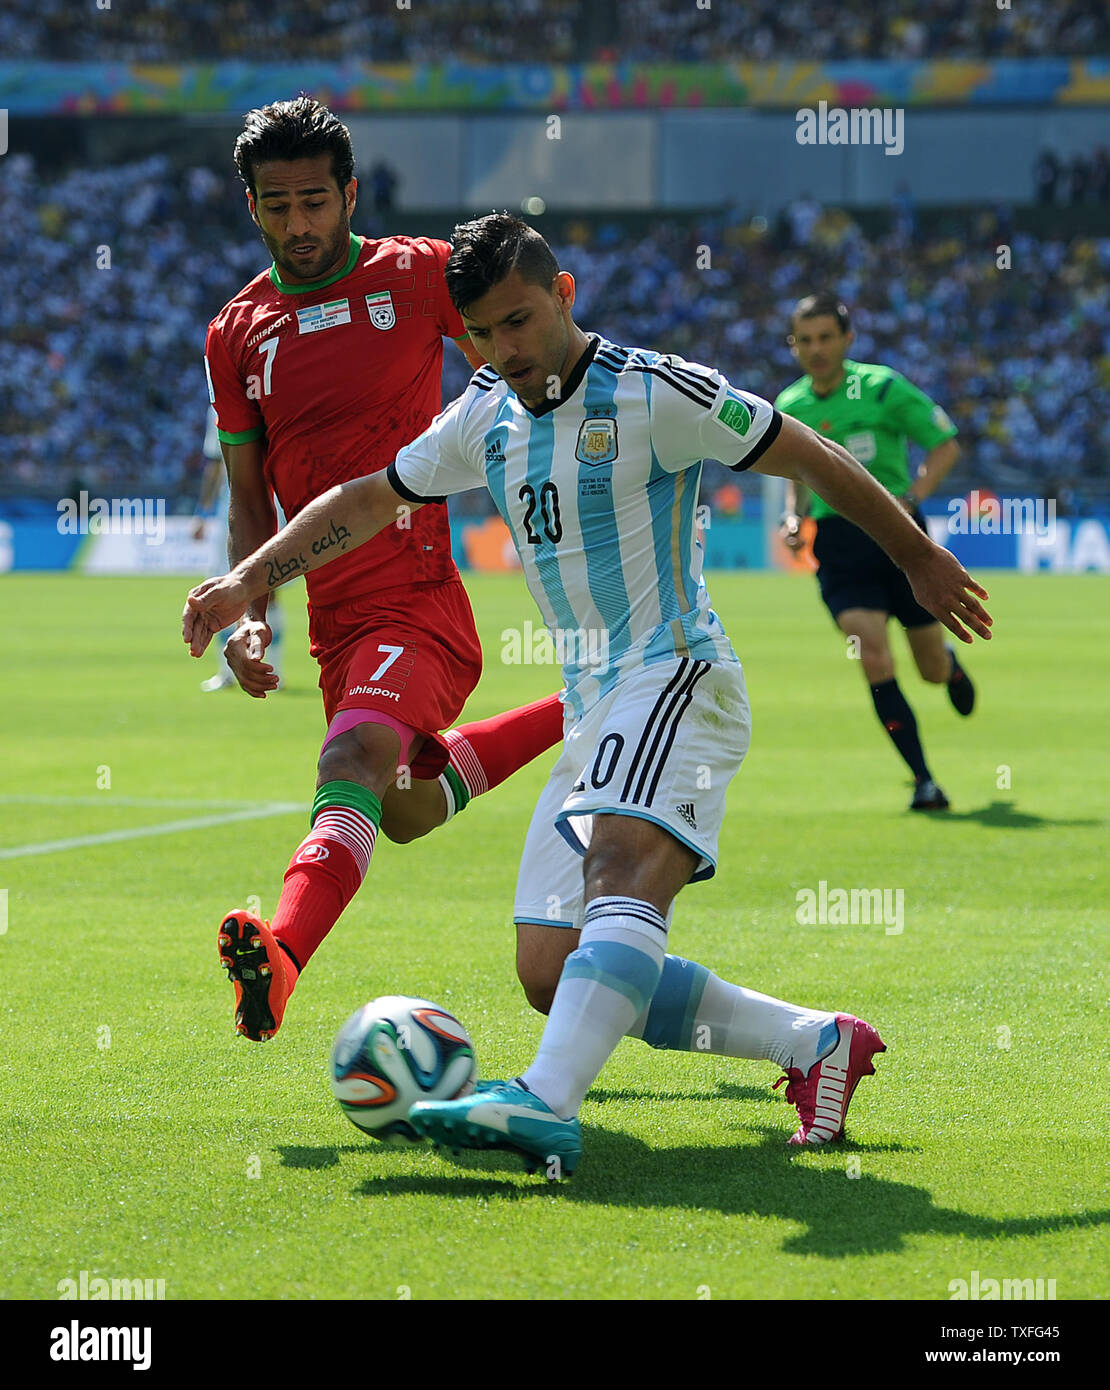 Sergio Aguero of Argentina competes with Masoud Shojaei (L) of Iran during the 2014 FIFA World Cup Group F match at the Estadio Mineirao in Belo Horizonte, Brazil on June 21, 2014. UPI/Chris Brunskill Stock Photo